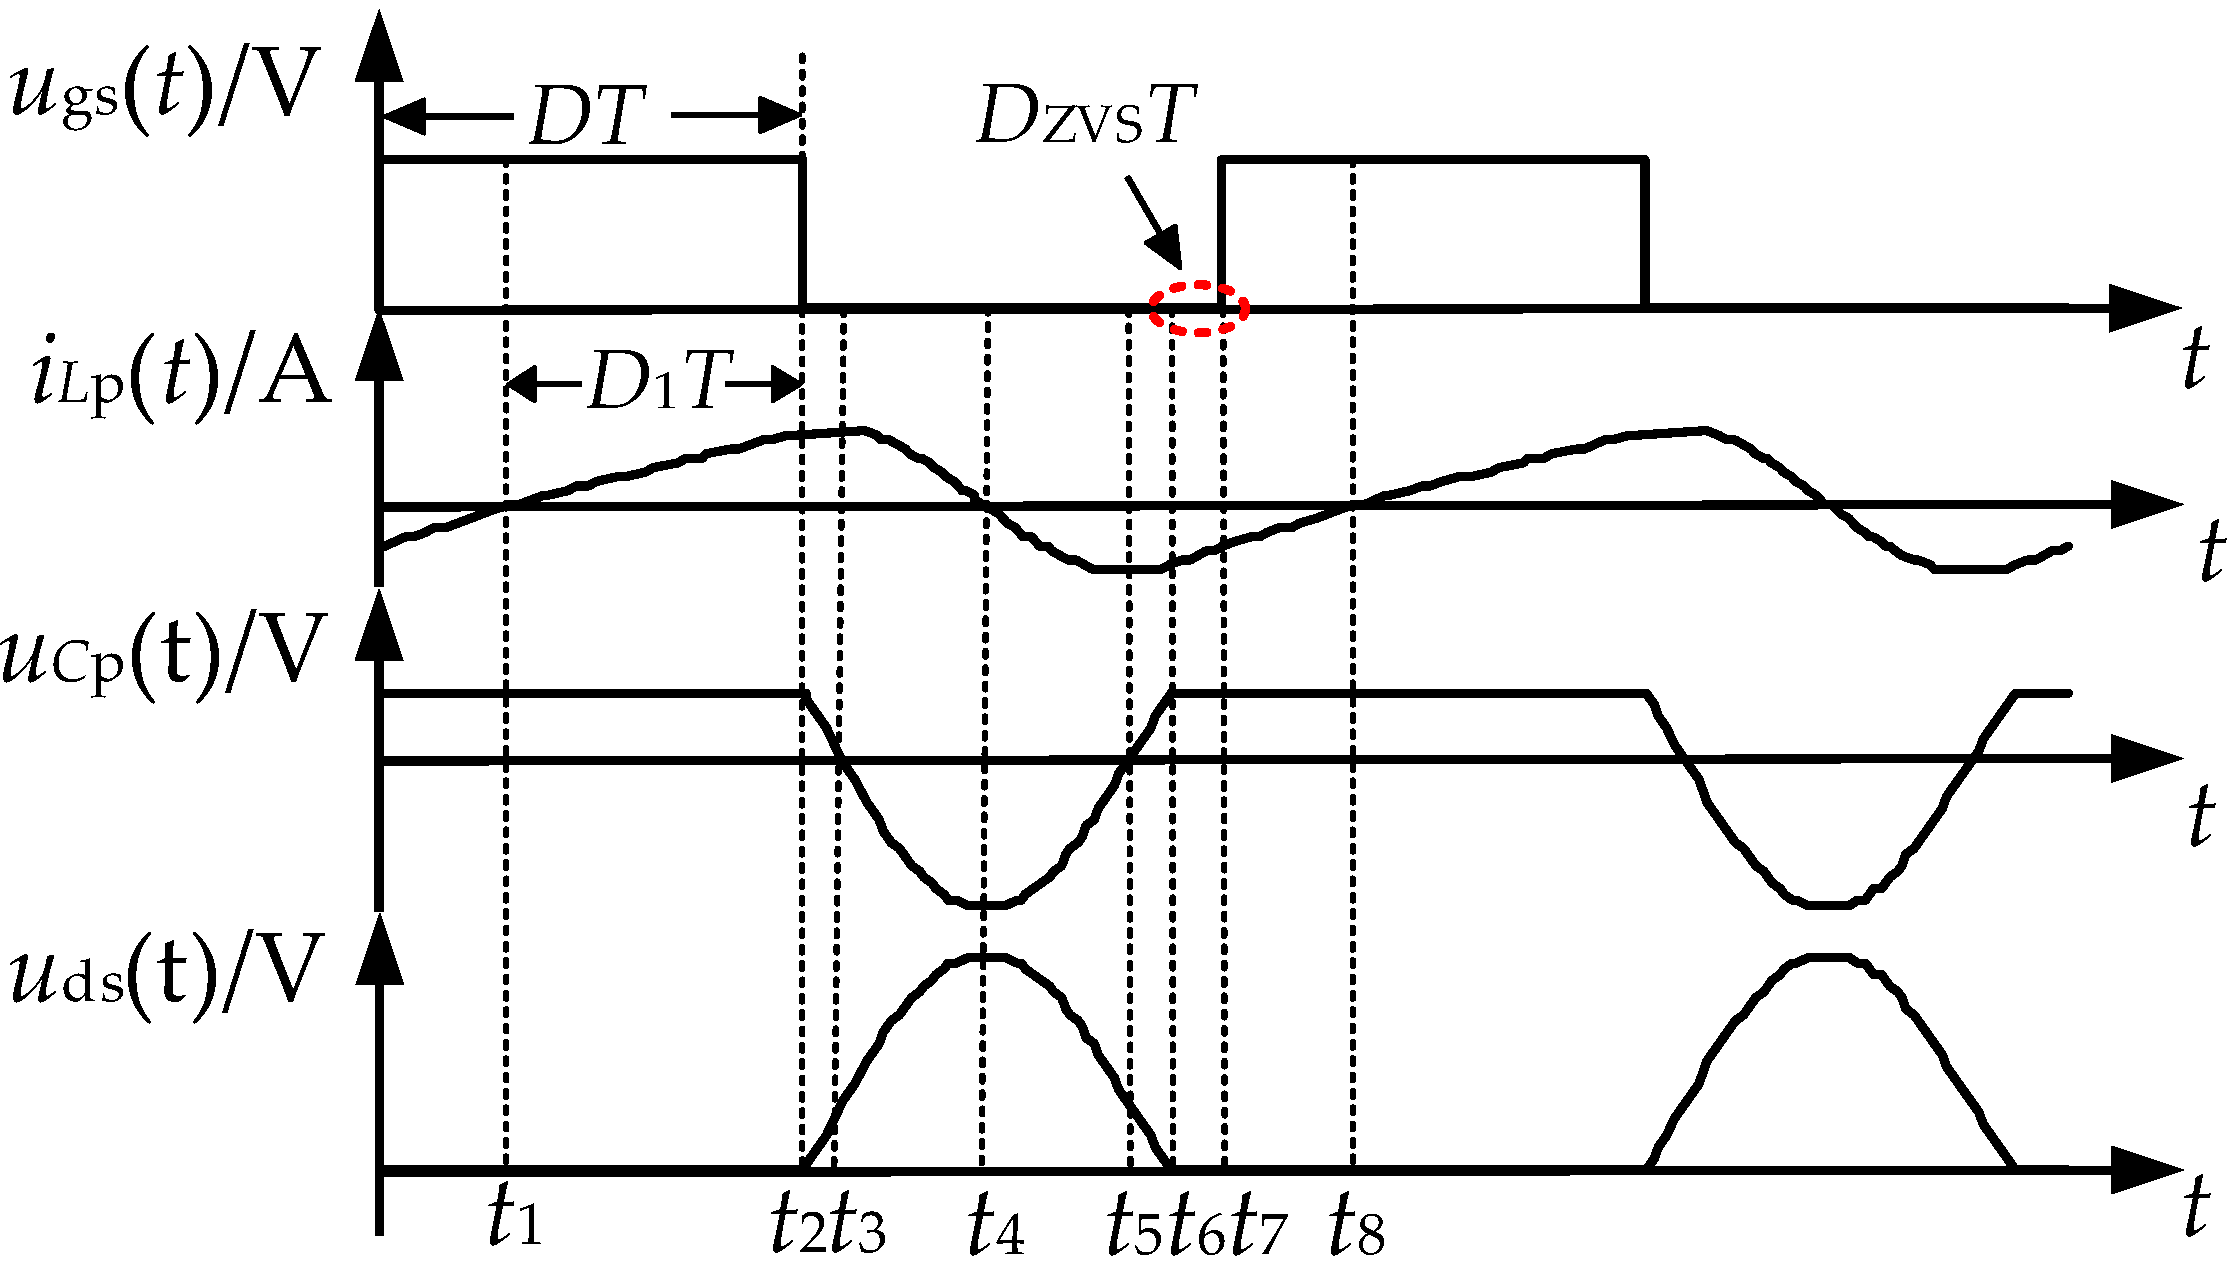 Soft Transition between Constant Current and Constant Voltage